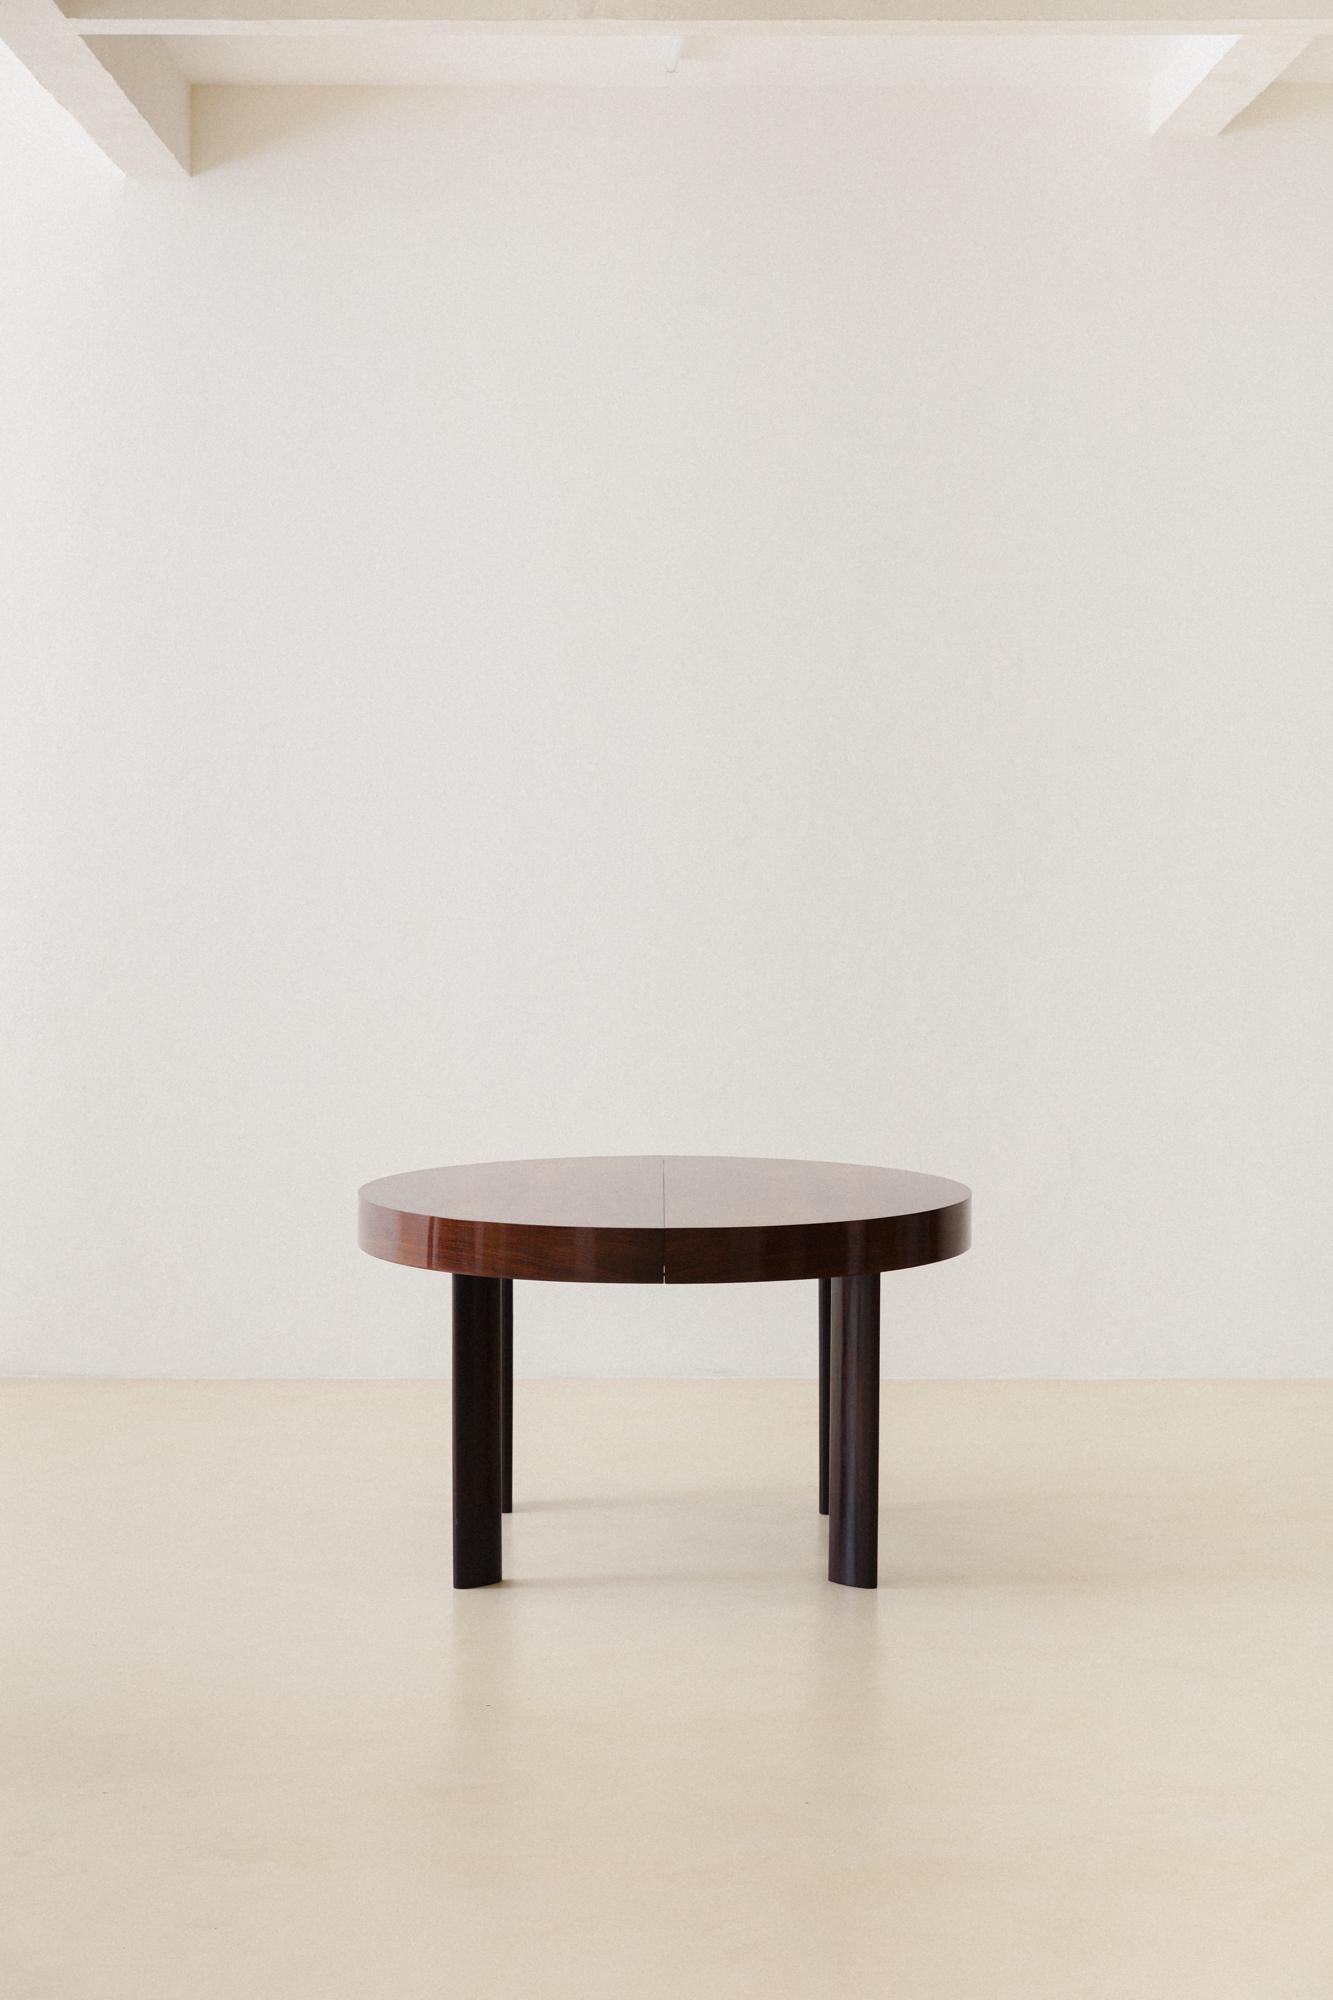 This Expandable dining table was produced by the Brazilian company Celina Decorações in the 1960s. The round table is made of Rosewood and has four seats, expandable for six seats by a very well-designed engine in the center.

The table is